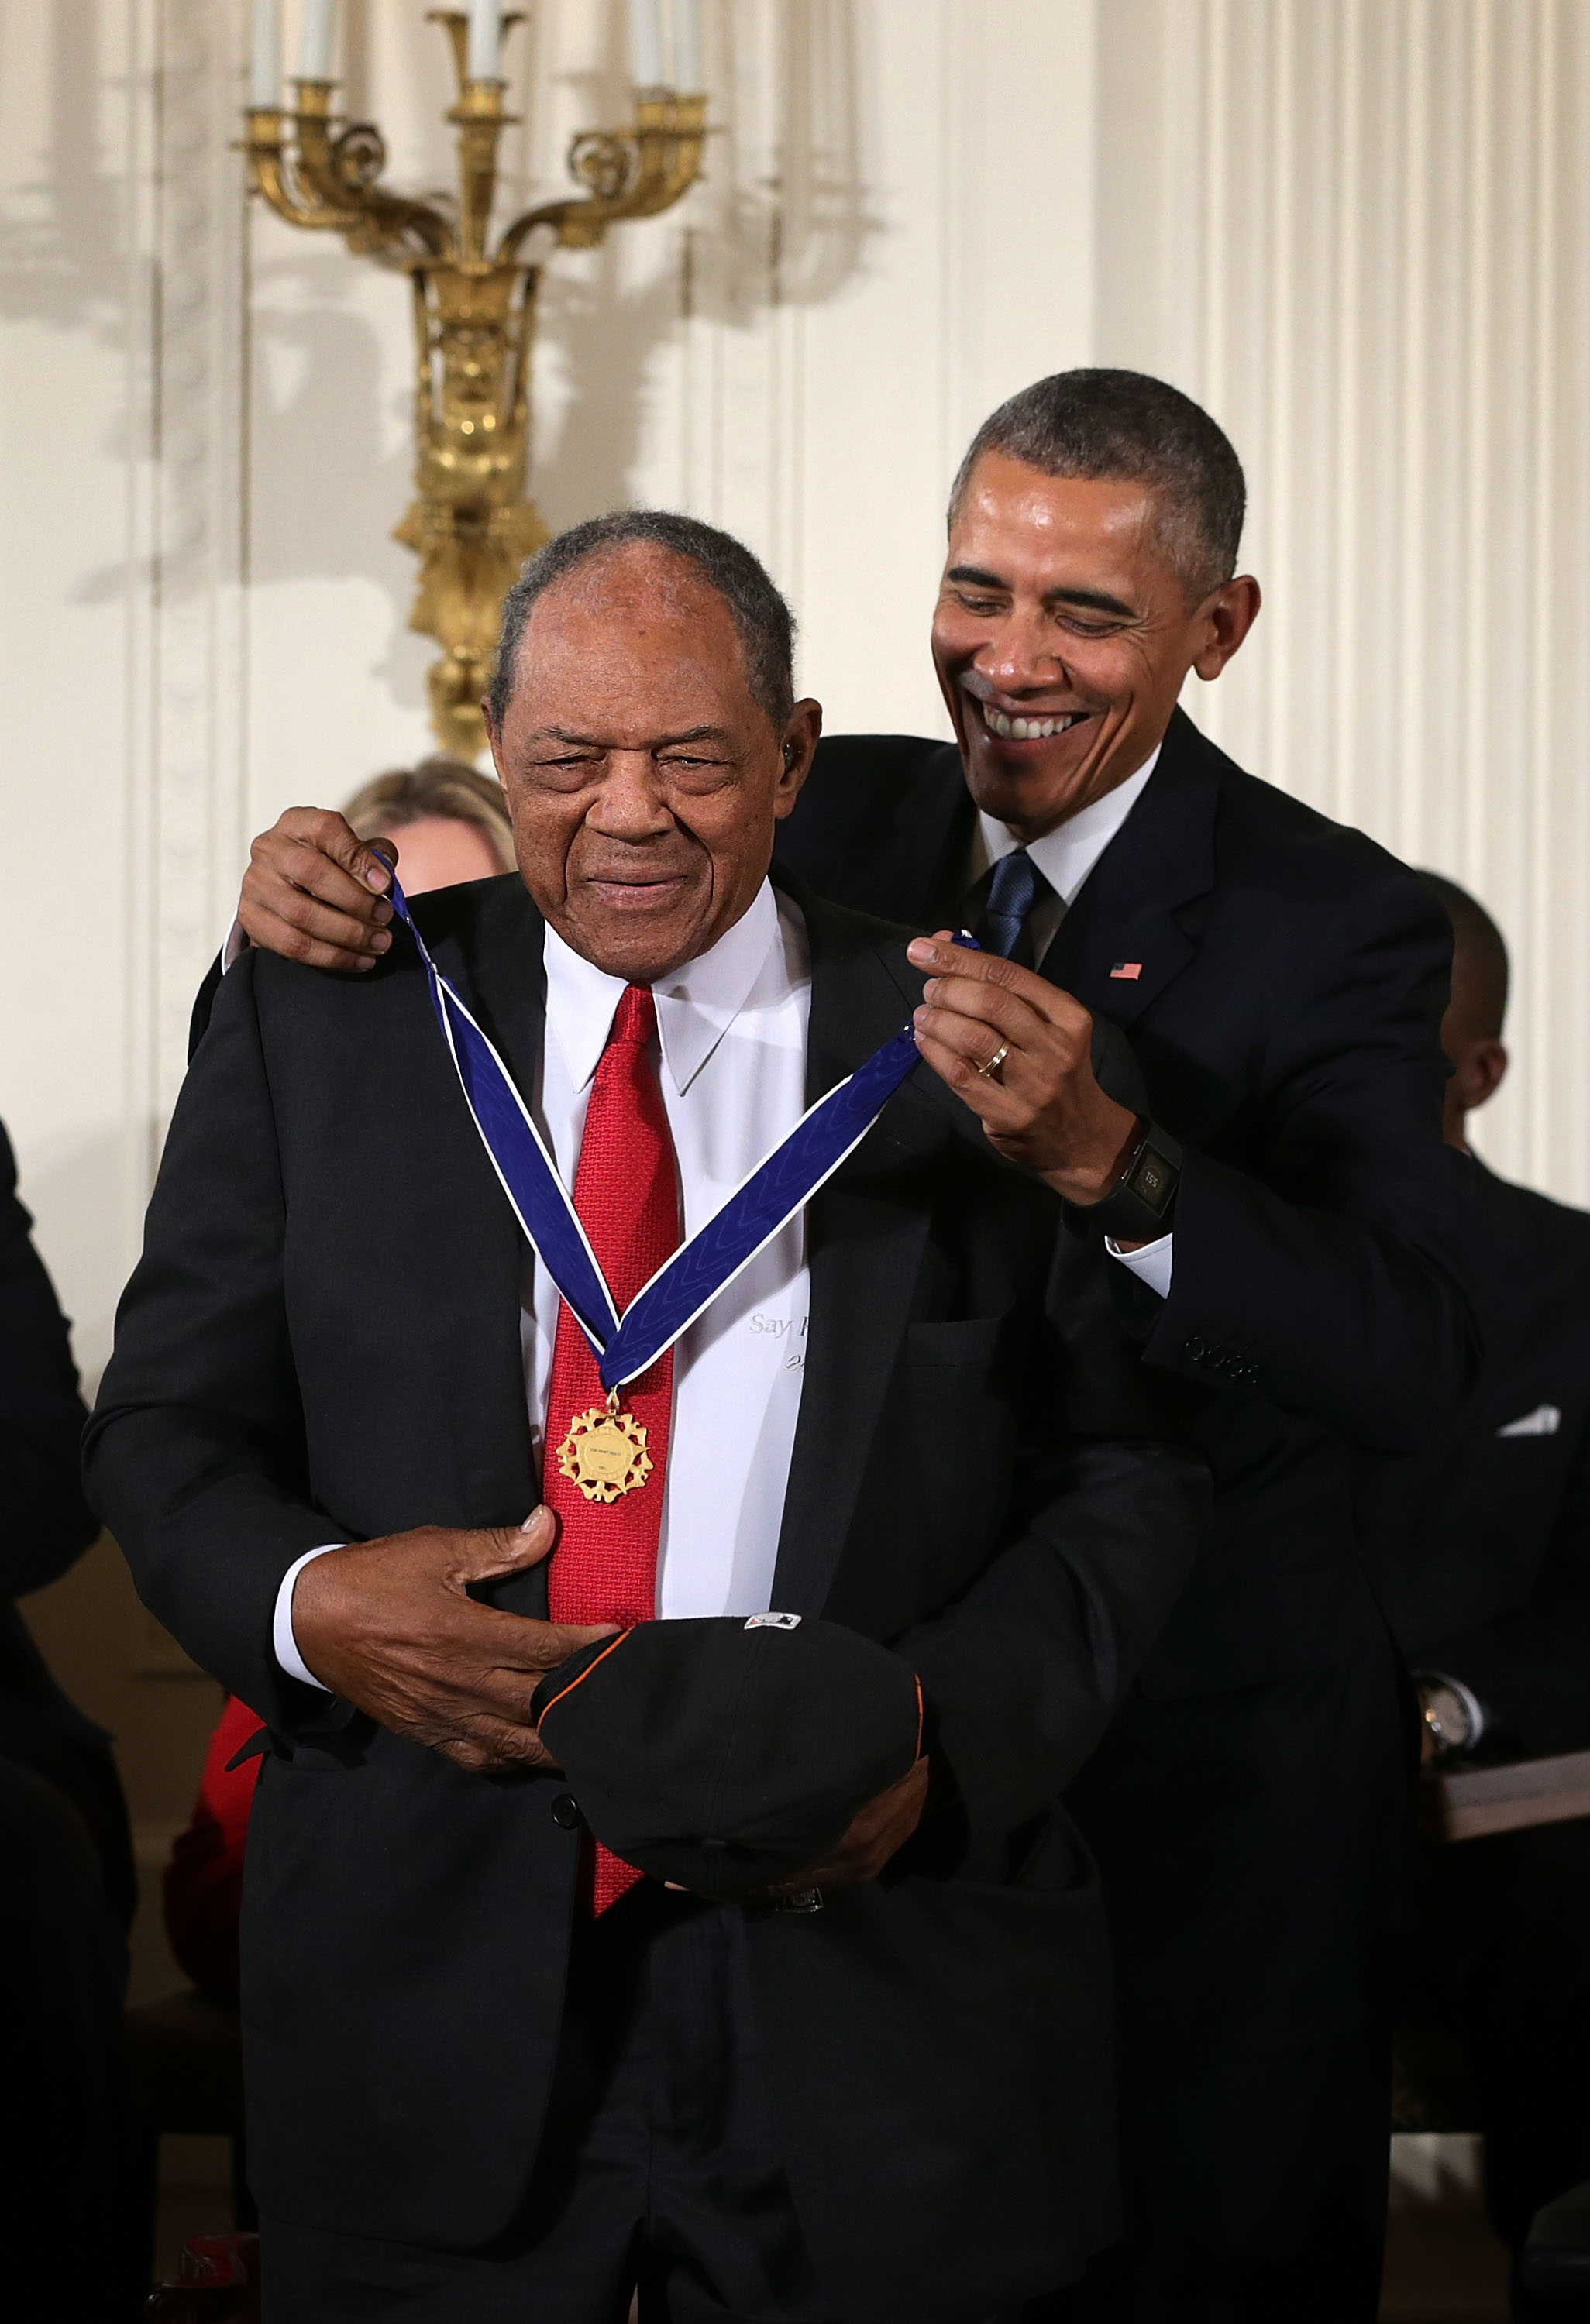 Former U.S. President Barack Obama awards Presidential Medal of Freedom to former professional baseball player Willie Mays at the White House on November 24, 2015. | Source: Getty Images